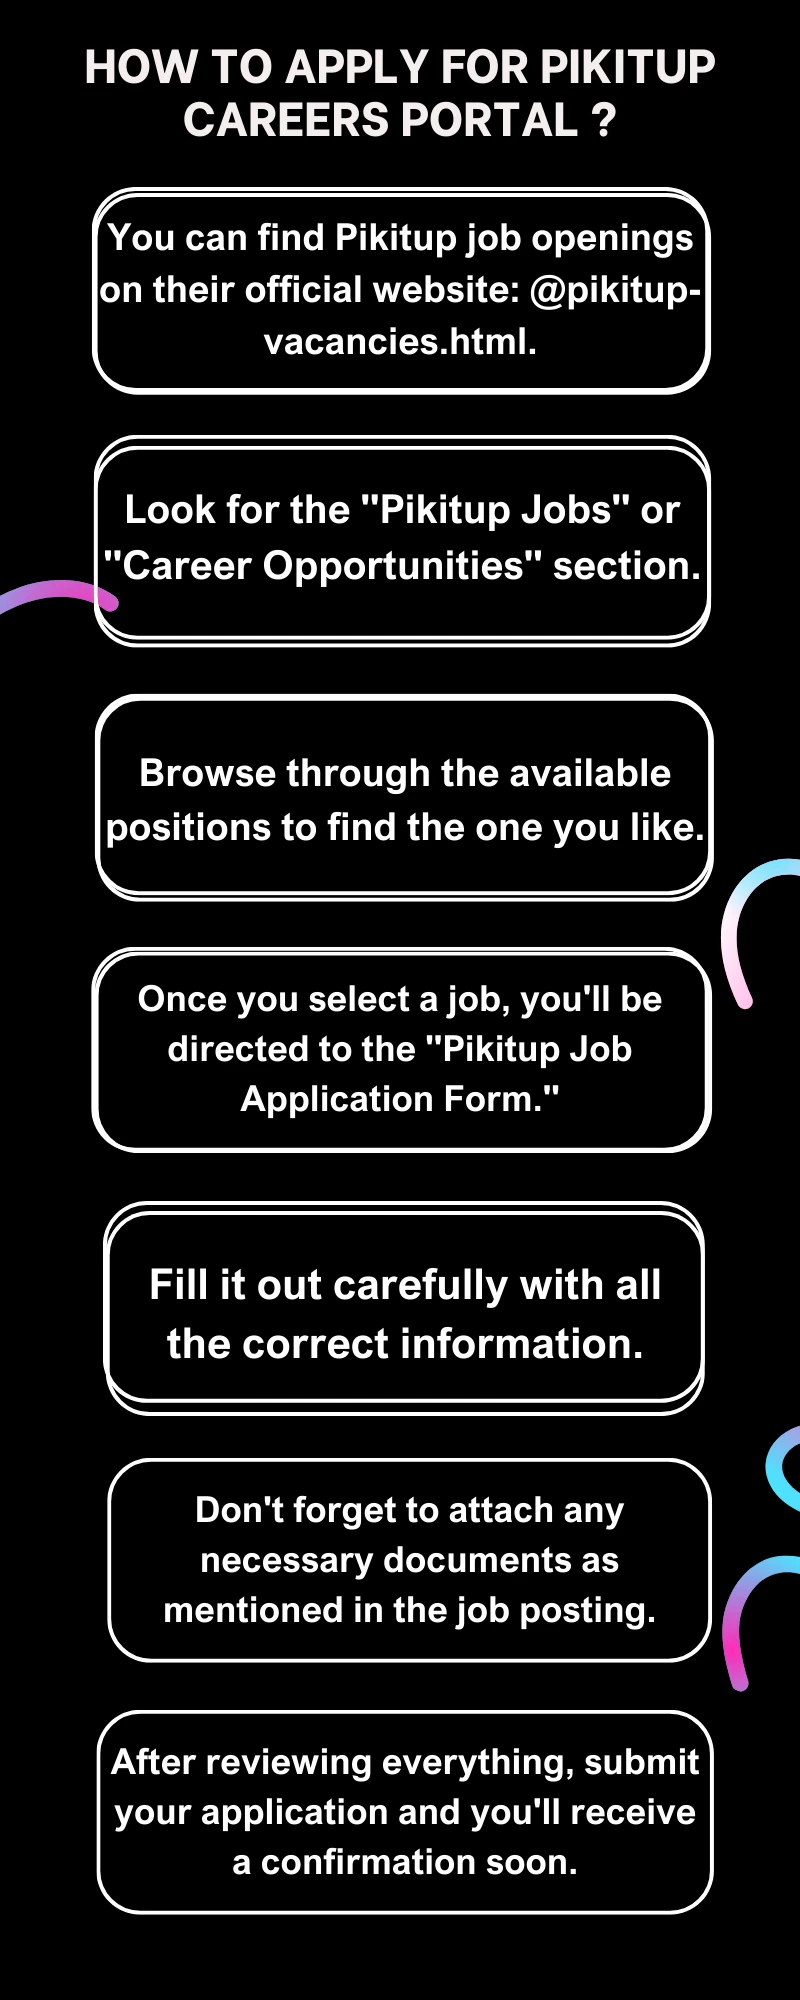 How To Apply for Pikitup Careers Portal ?